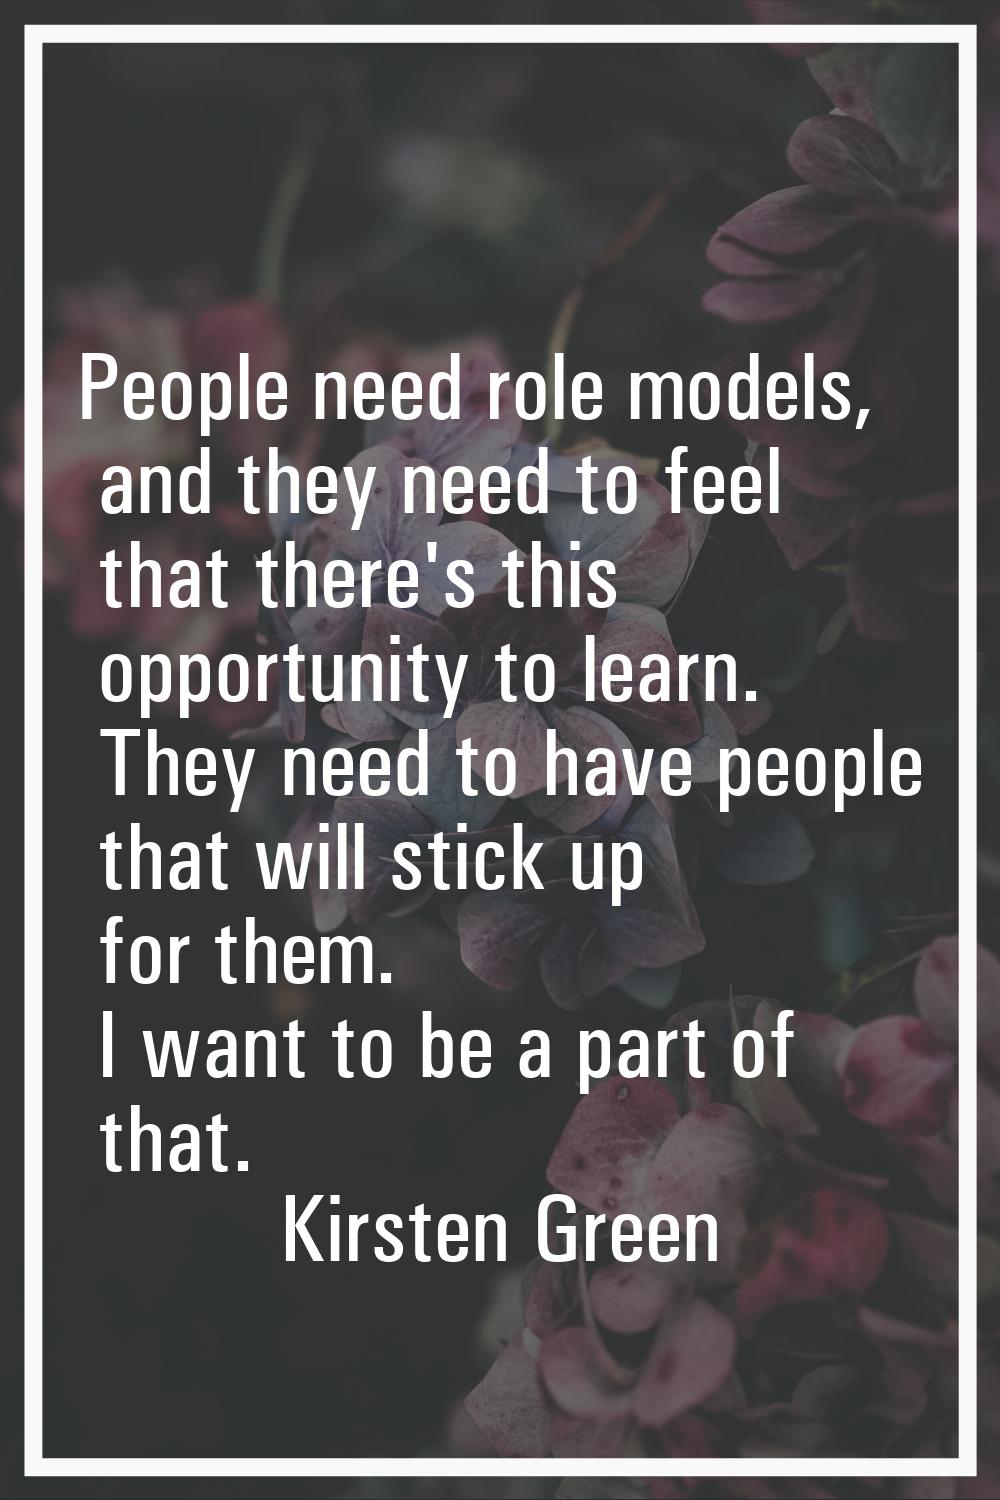 People need role models, and they need to feel that there's this opportunity to learn. They need to